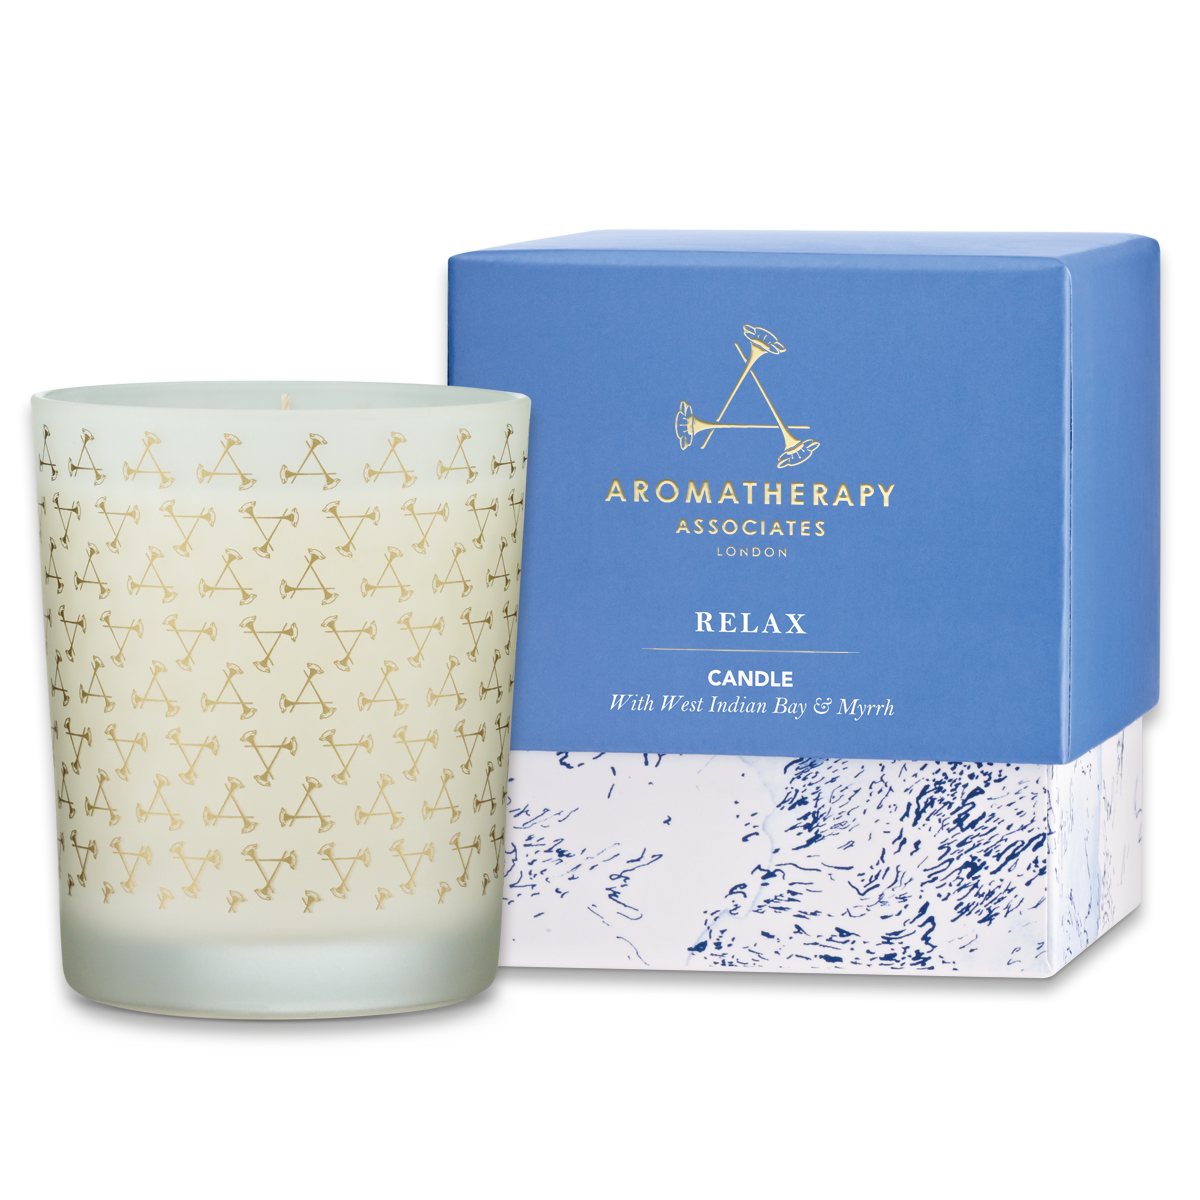 Aromatherapy Associates Relax Candle 27cl